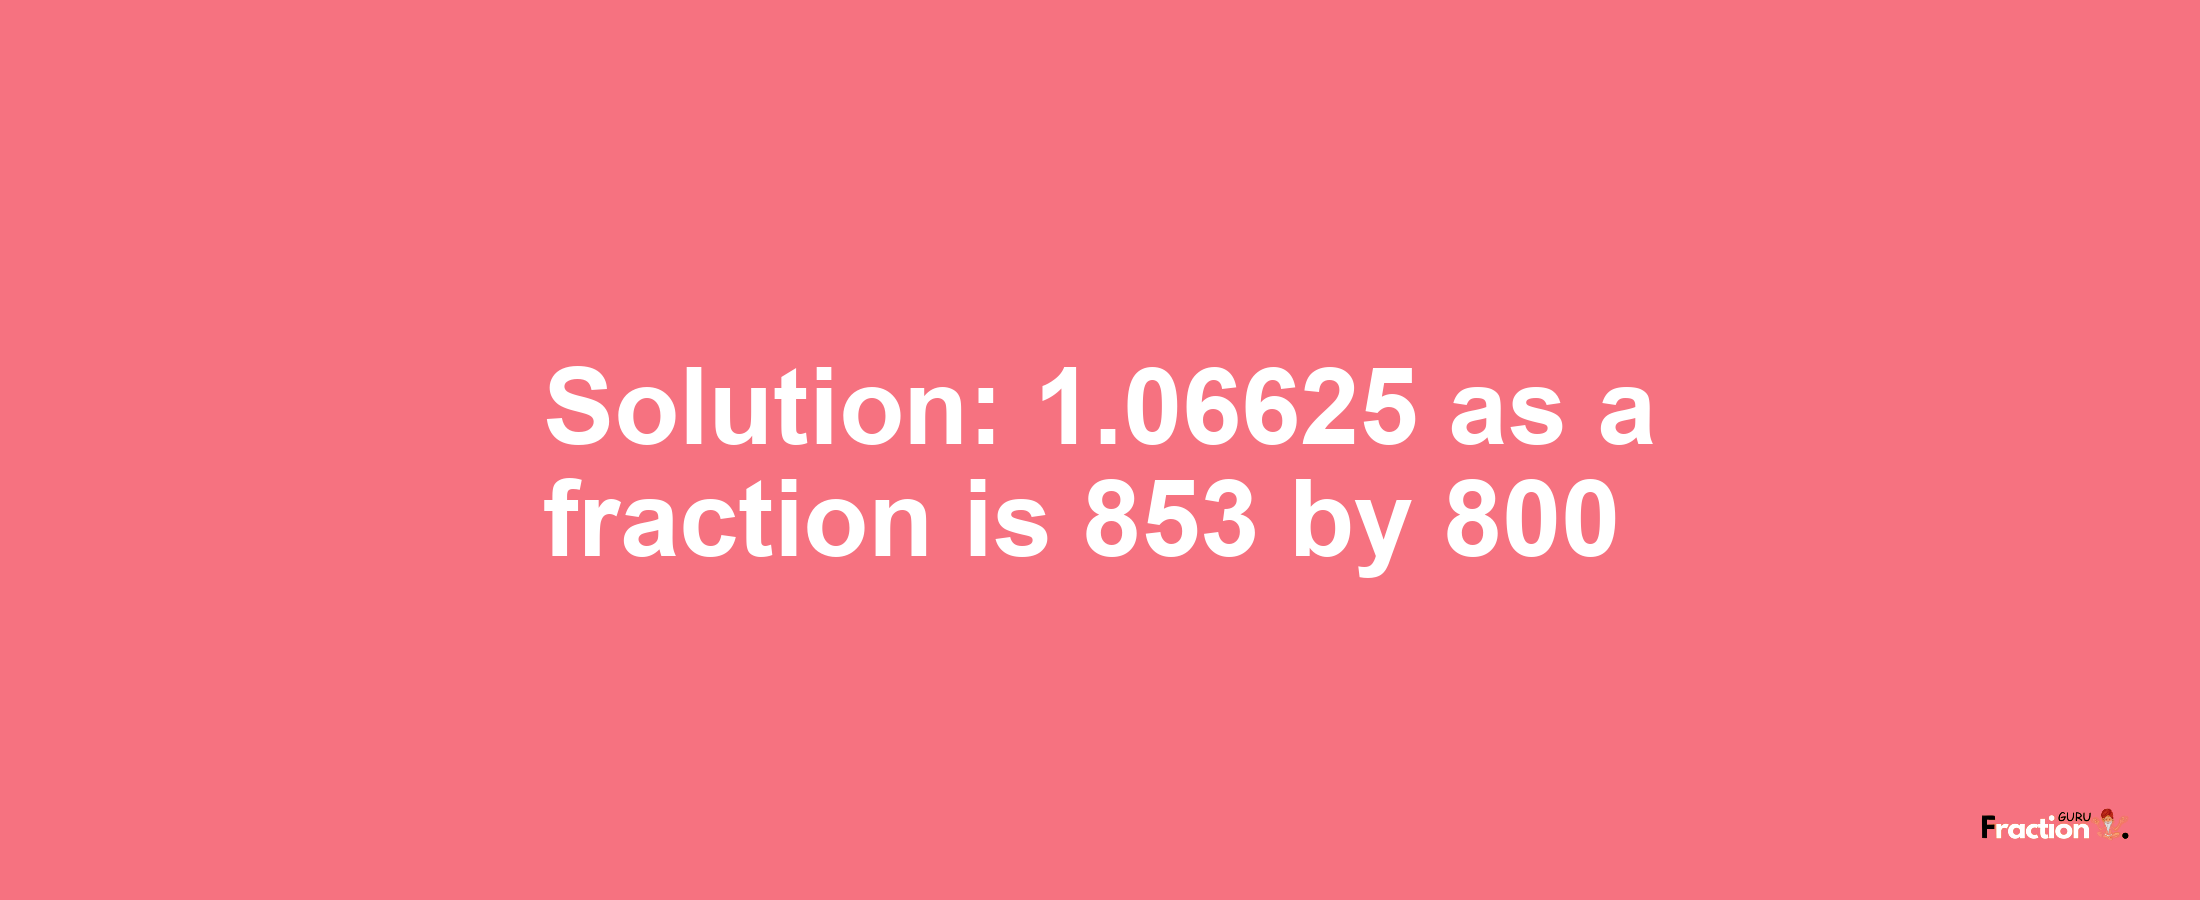 Solution:1.06625 as a fraction is 853/800